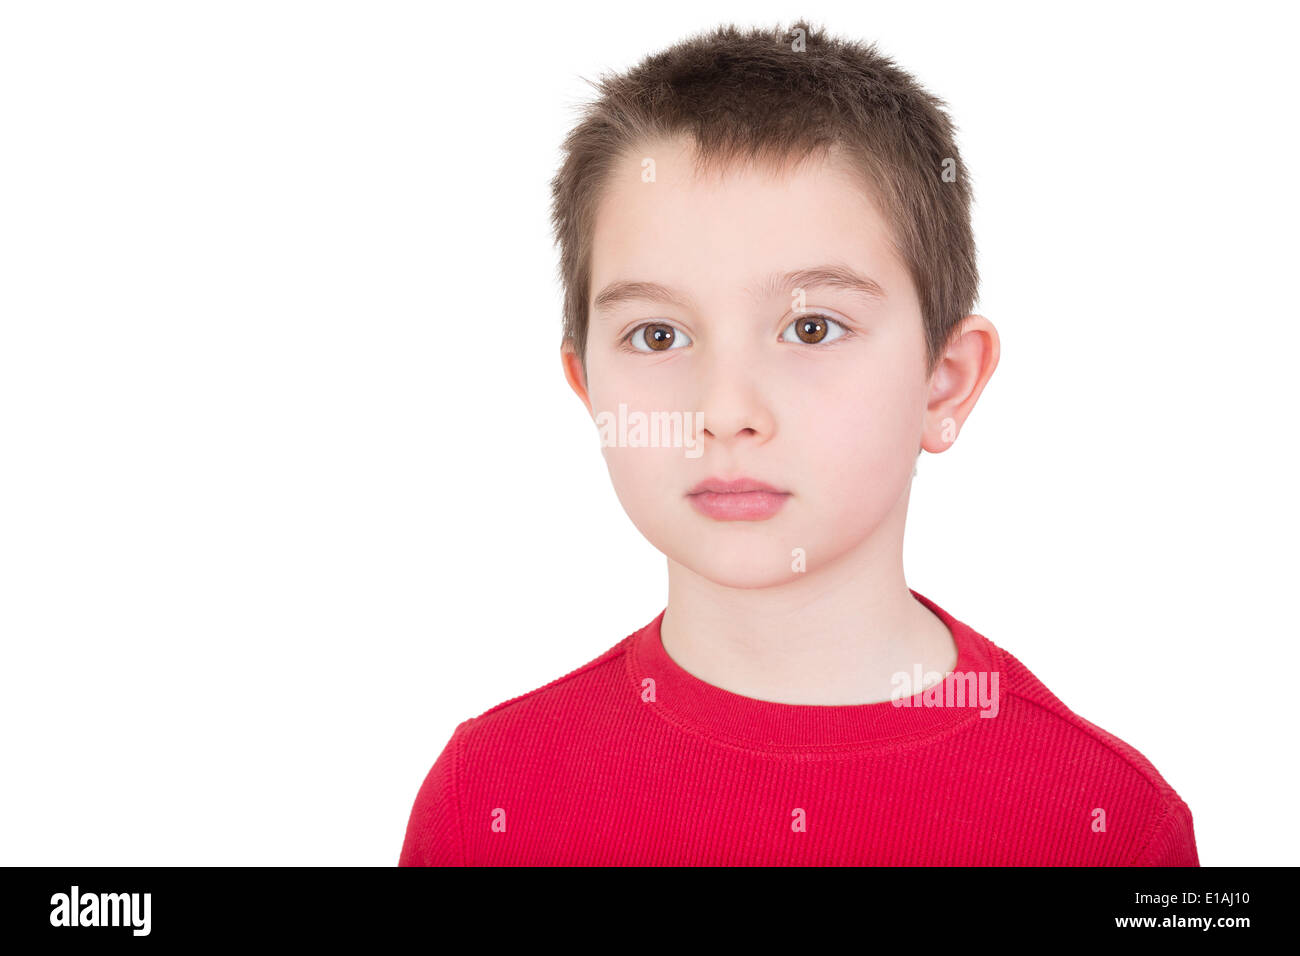 Sad wistful young boy with a solemn introvert expression staring off into the distance isolated on white with copy space Stock Photo